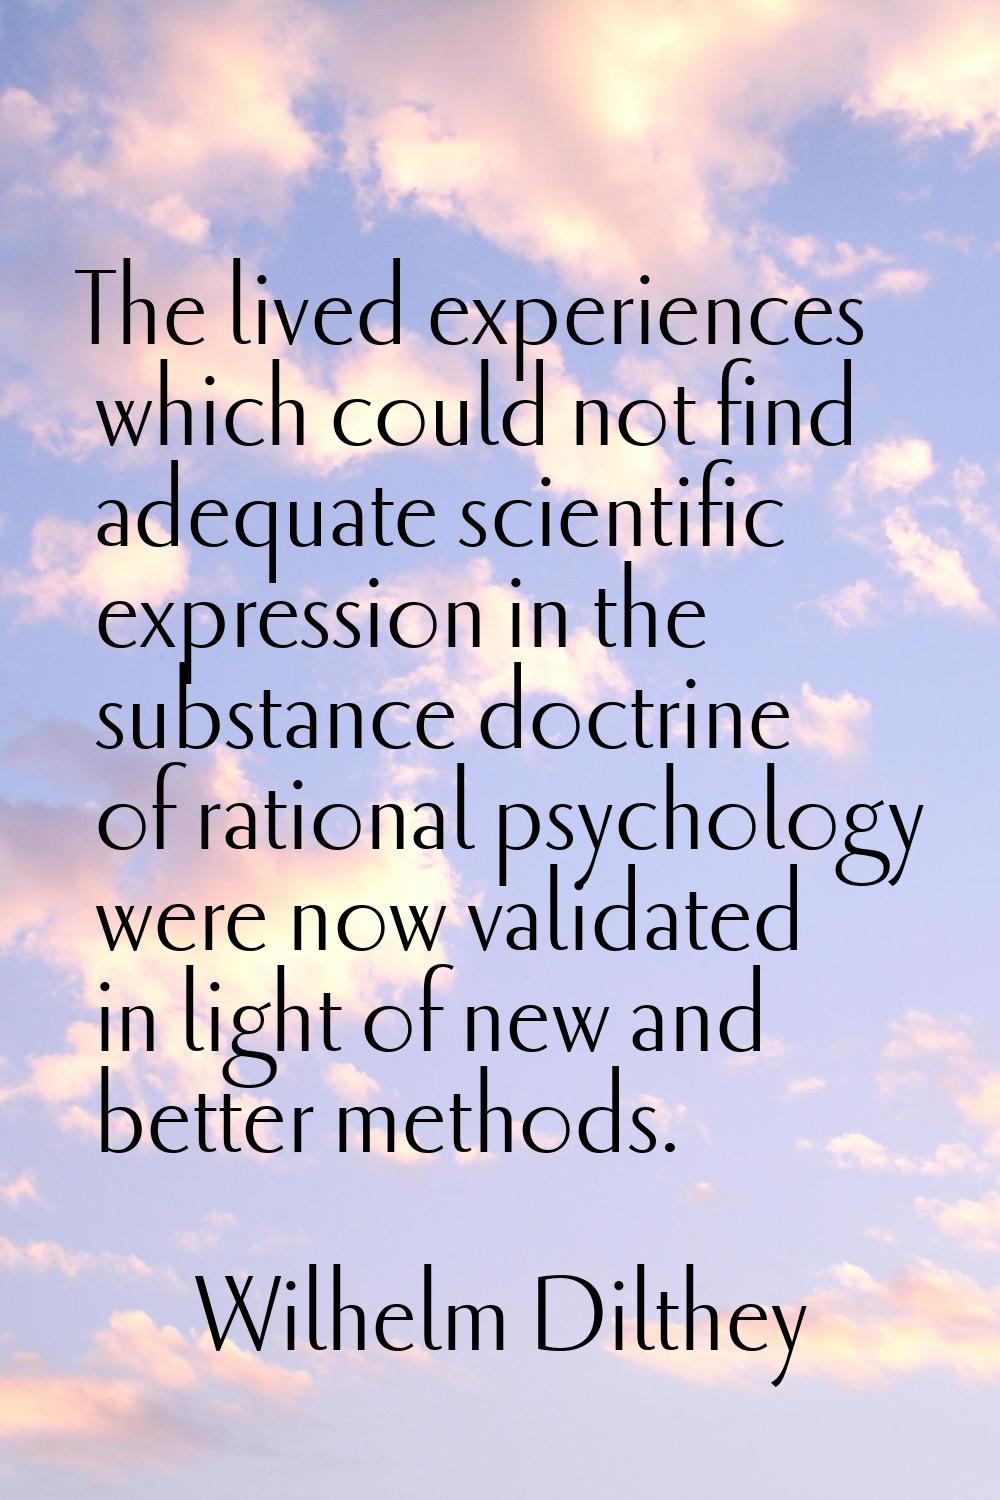 The lived experiences which could not find adequate scientific expression in the substance doctrine